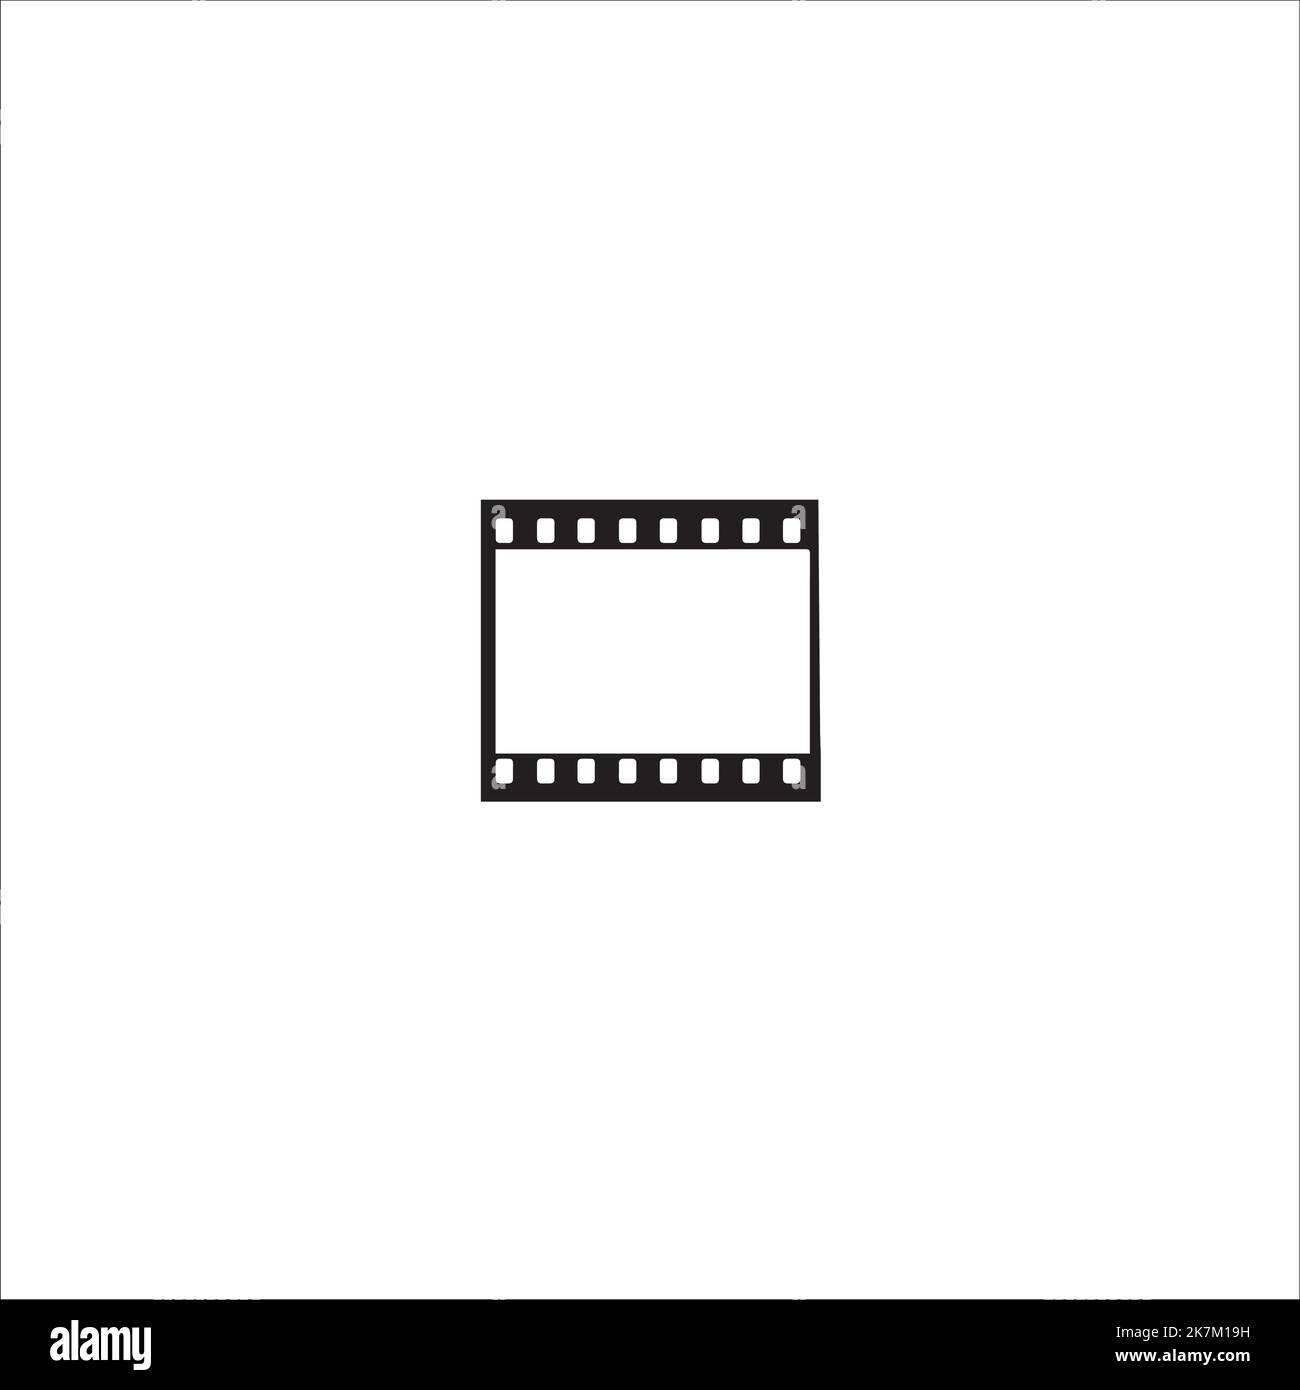 35 mm film reel icon flat design on white isolated background. Stock Vector